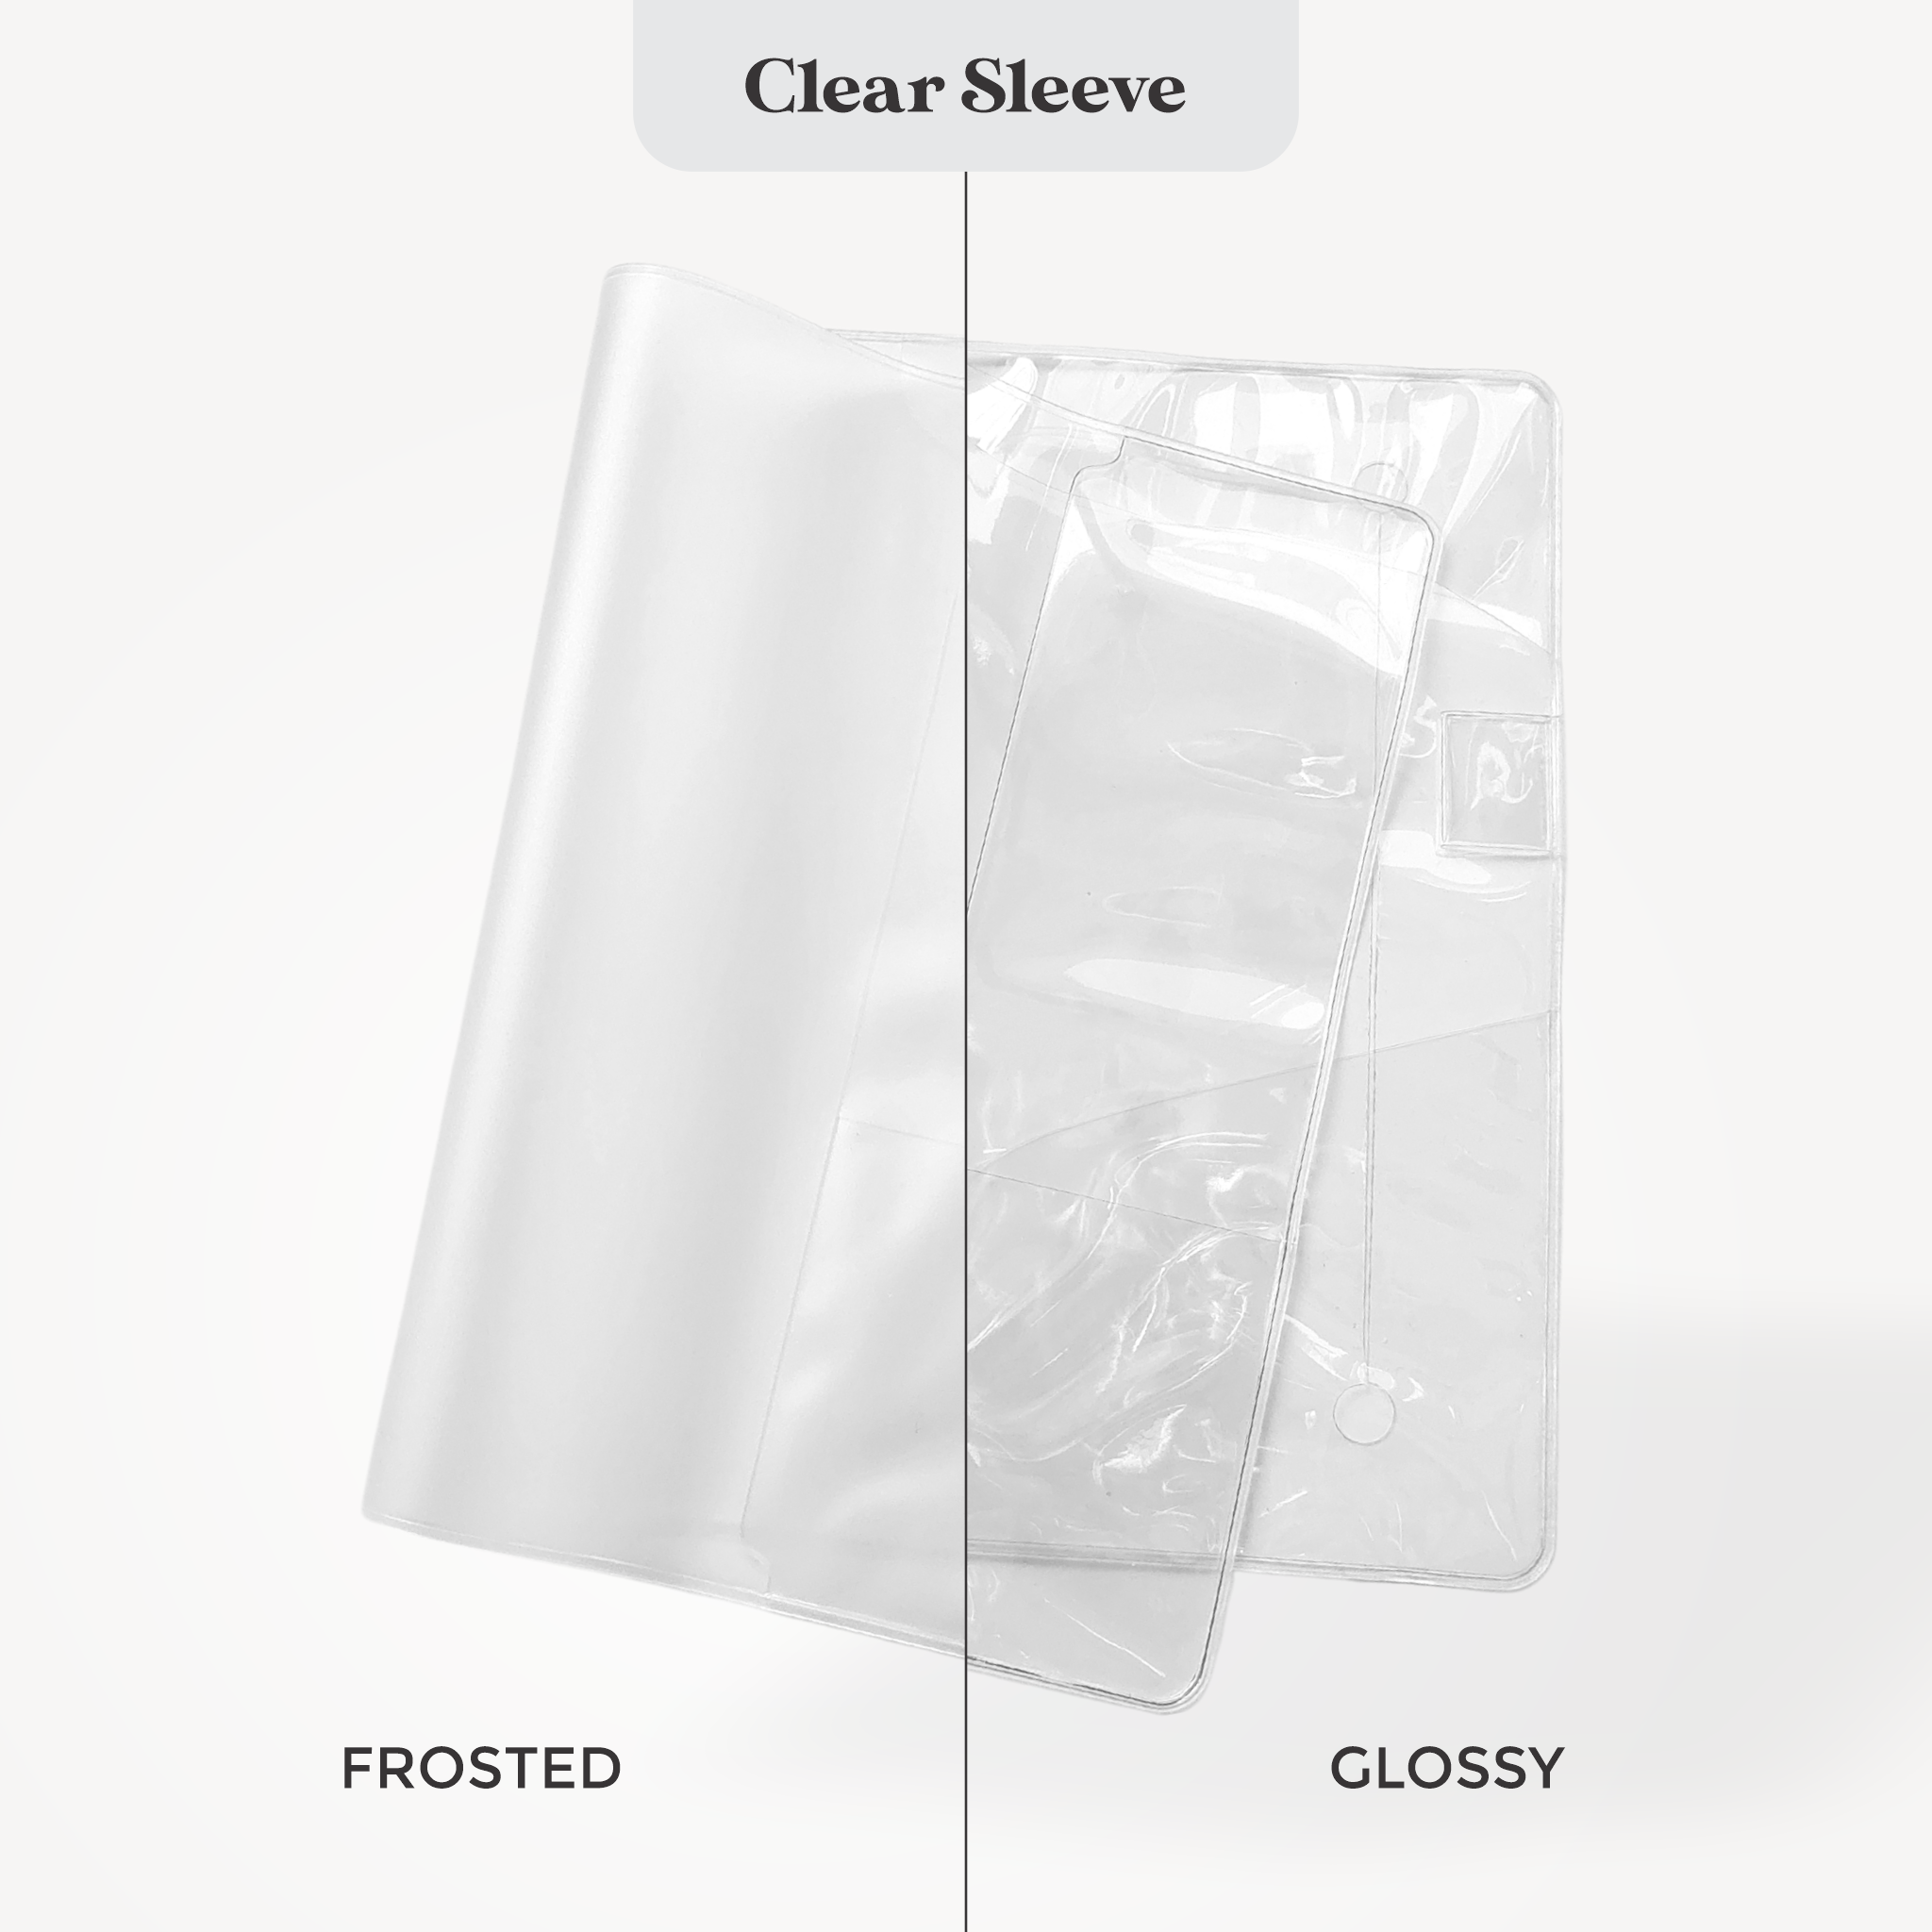 Frosted Clear Sleeve